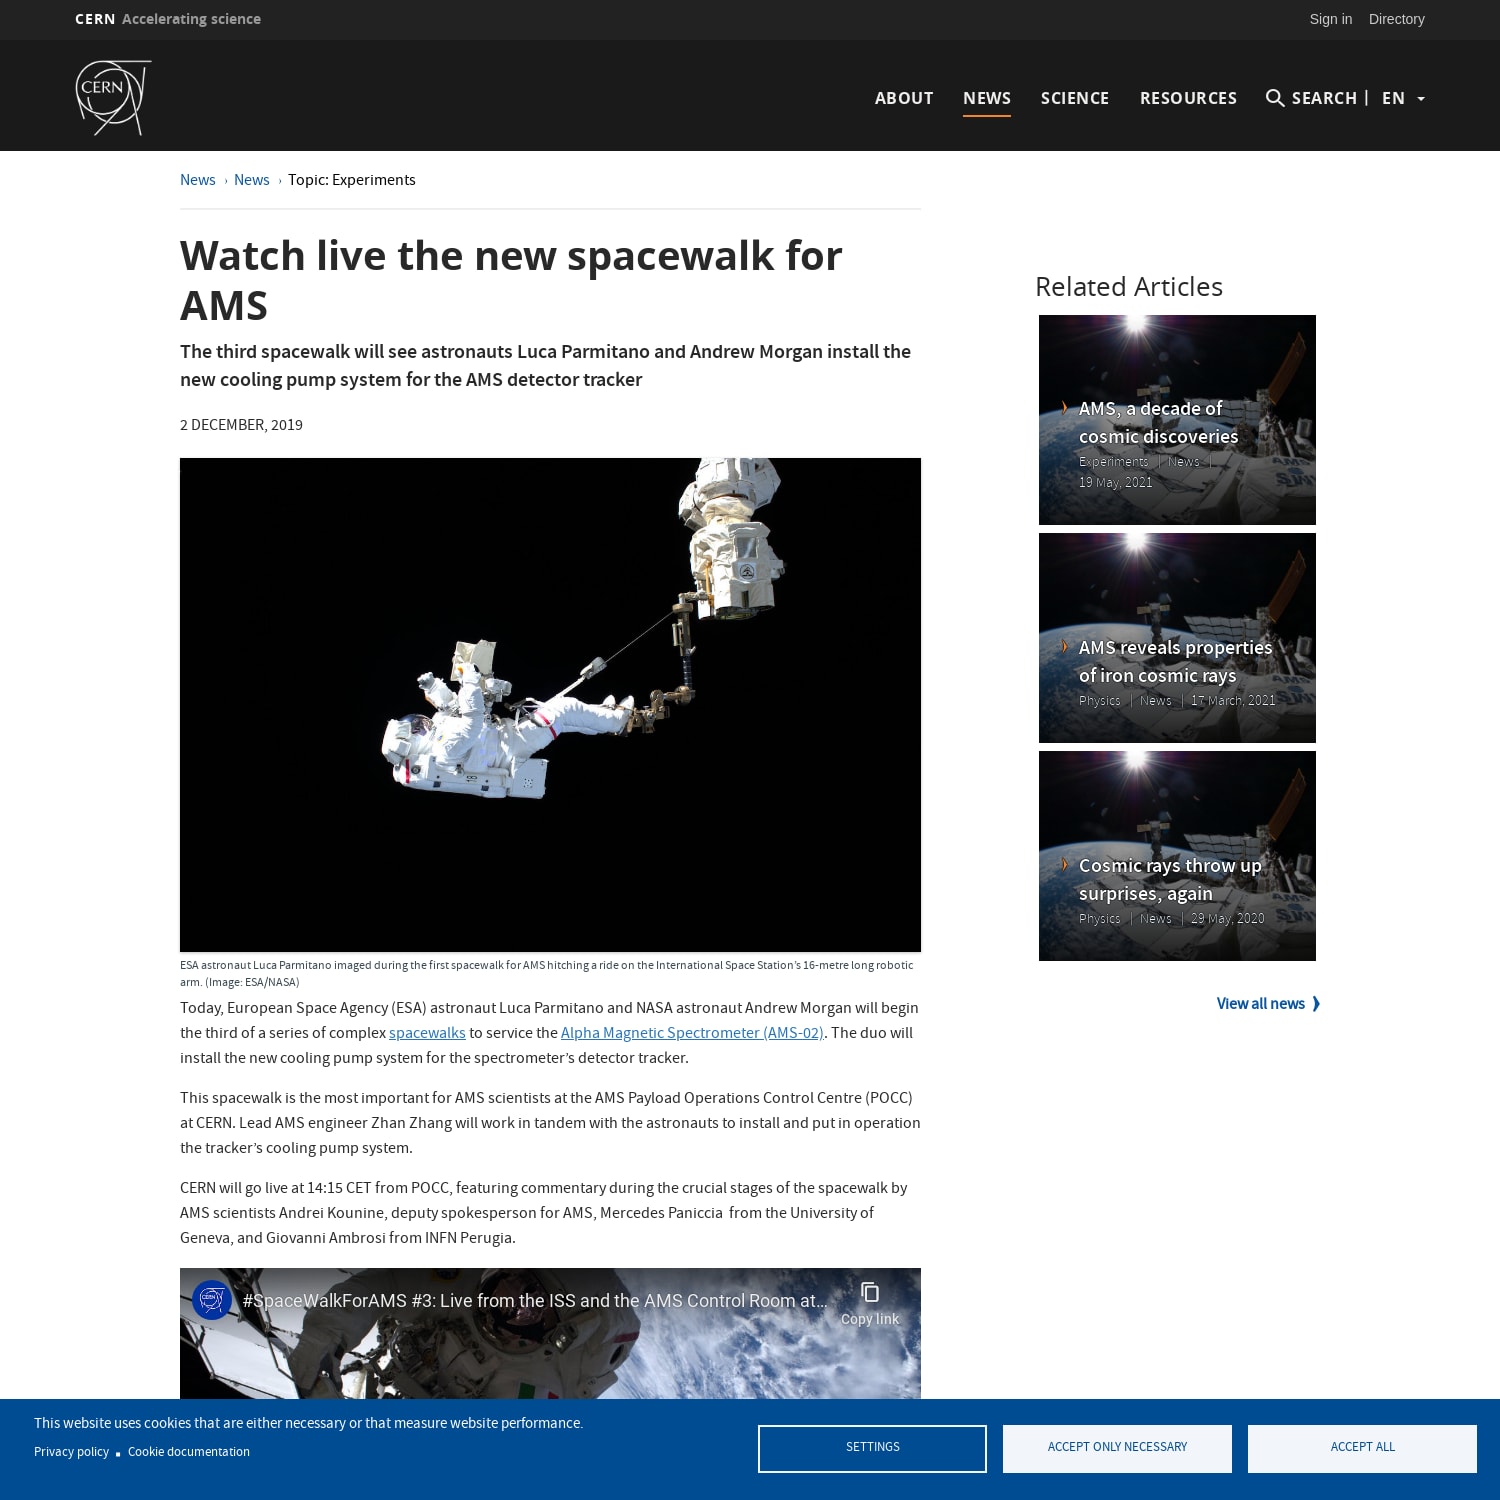 Watch live the new spacewalk for AMS